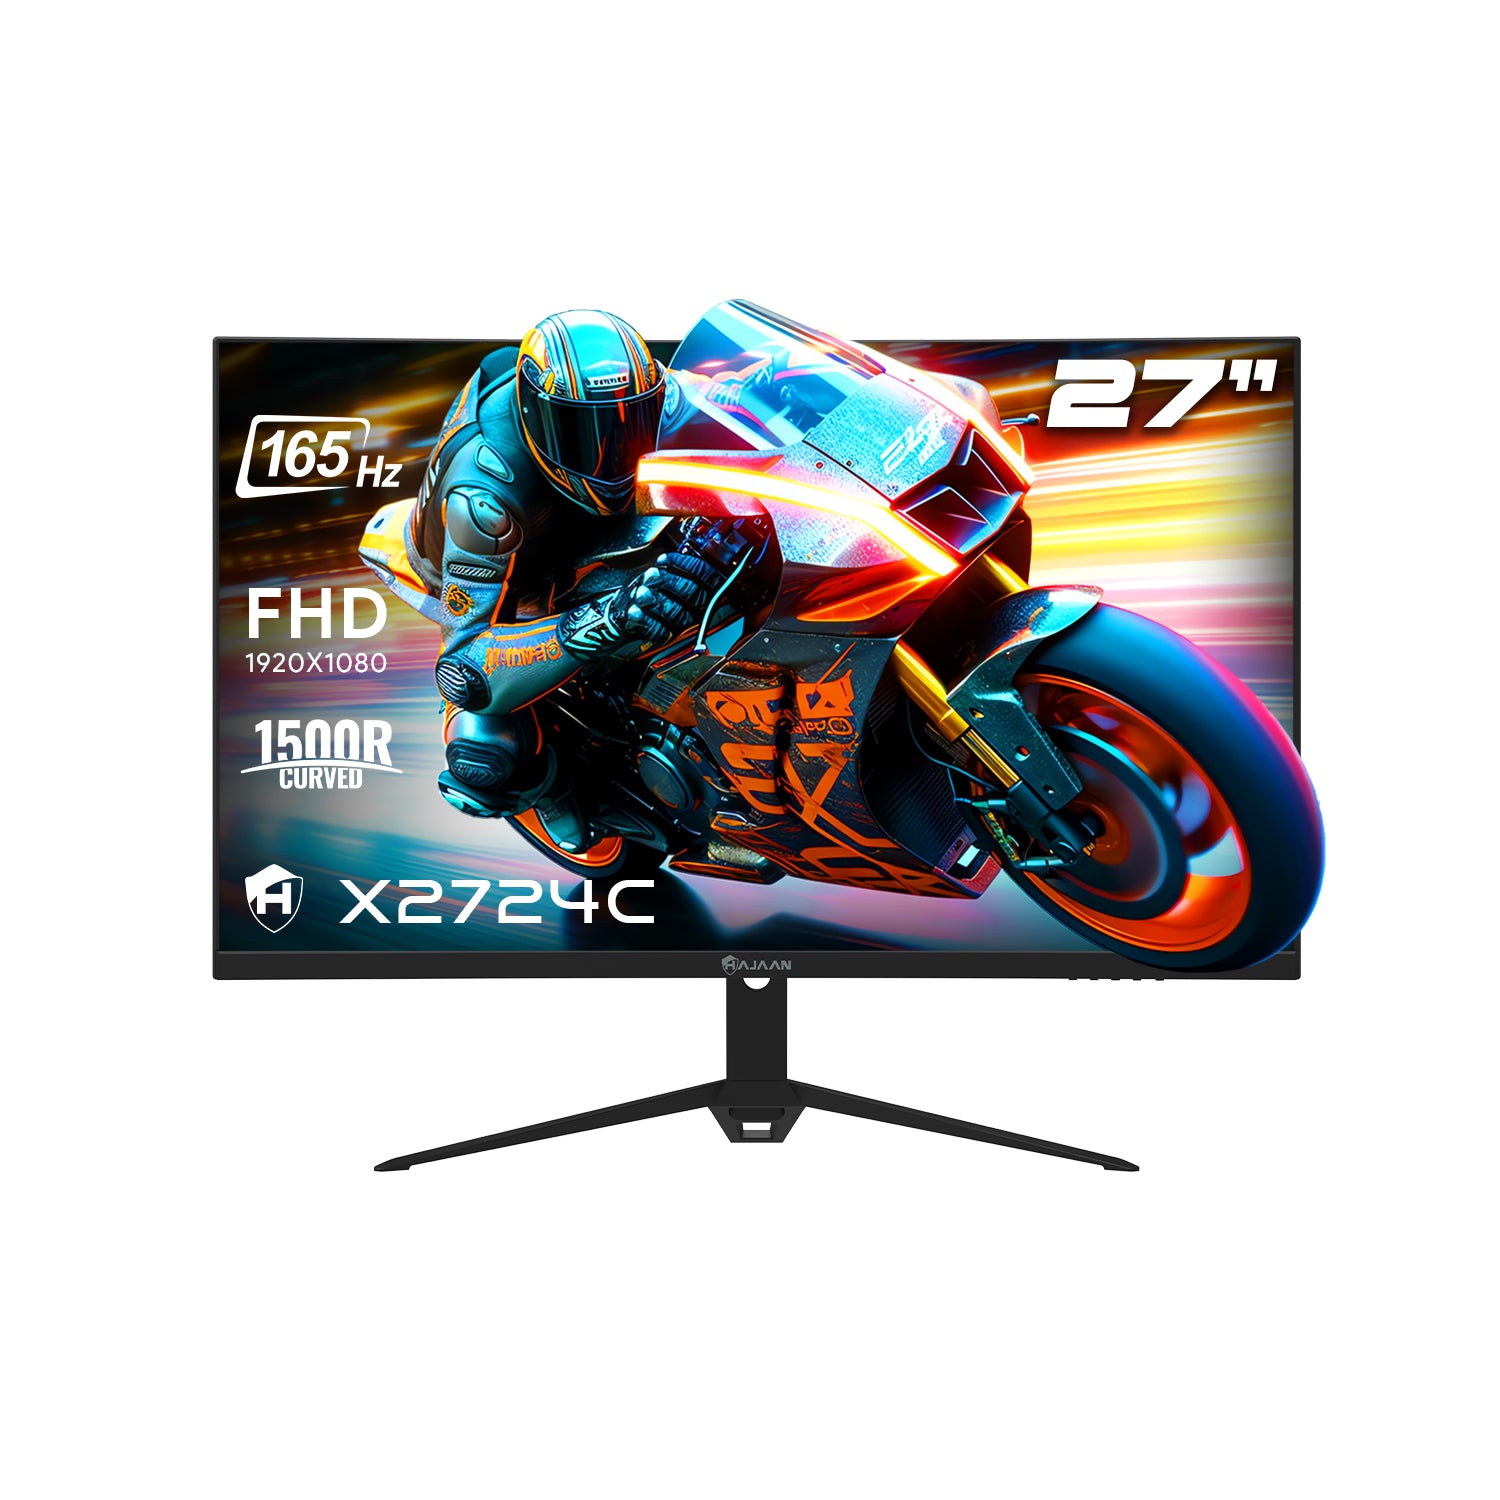 HAJAAN 27” Inch FHD 1080p VA Curved Gaming Monitor with RGB Backlight 165Hz Refresh Rate | Tilt Adjustment | Wall Mountable | 2x HDMI, DP (X2724C) - 1 Year Warranty